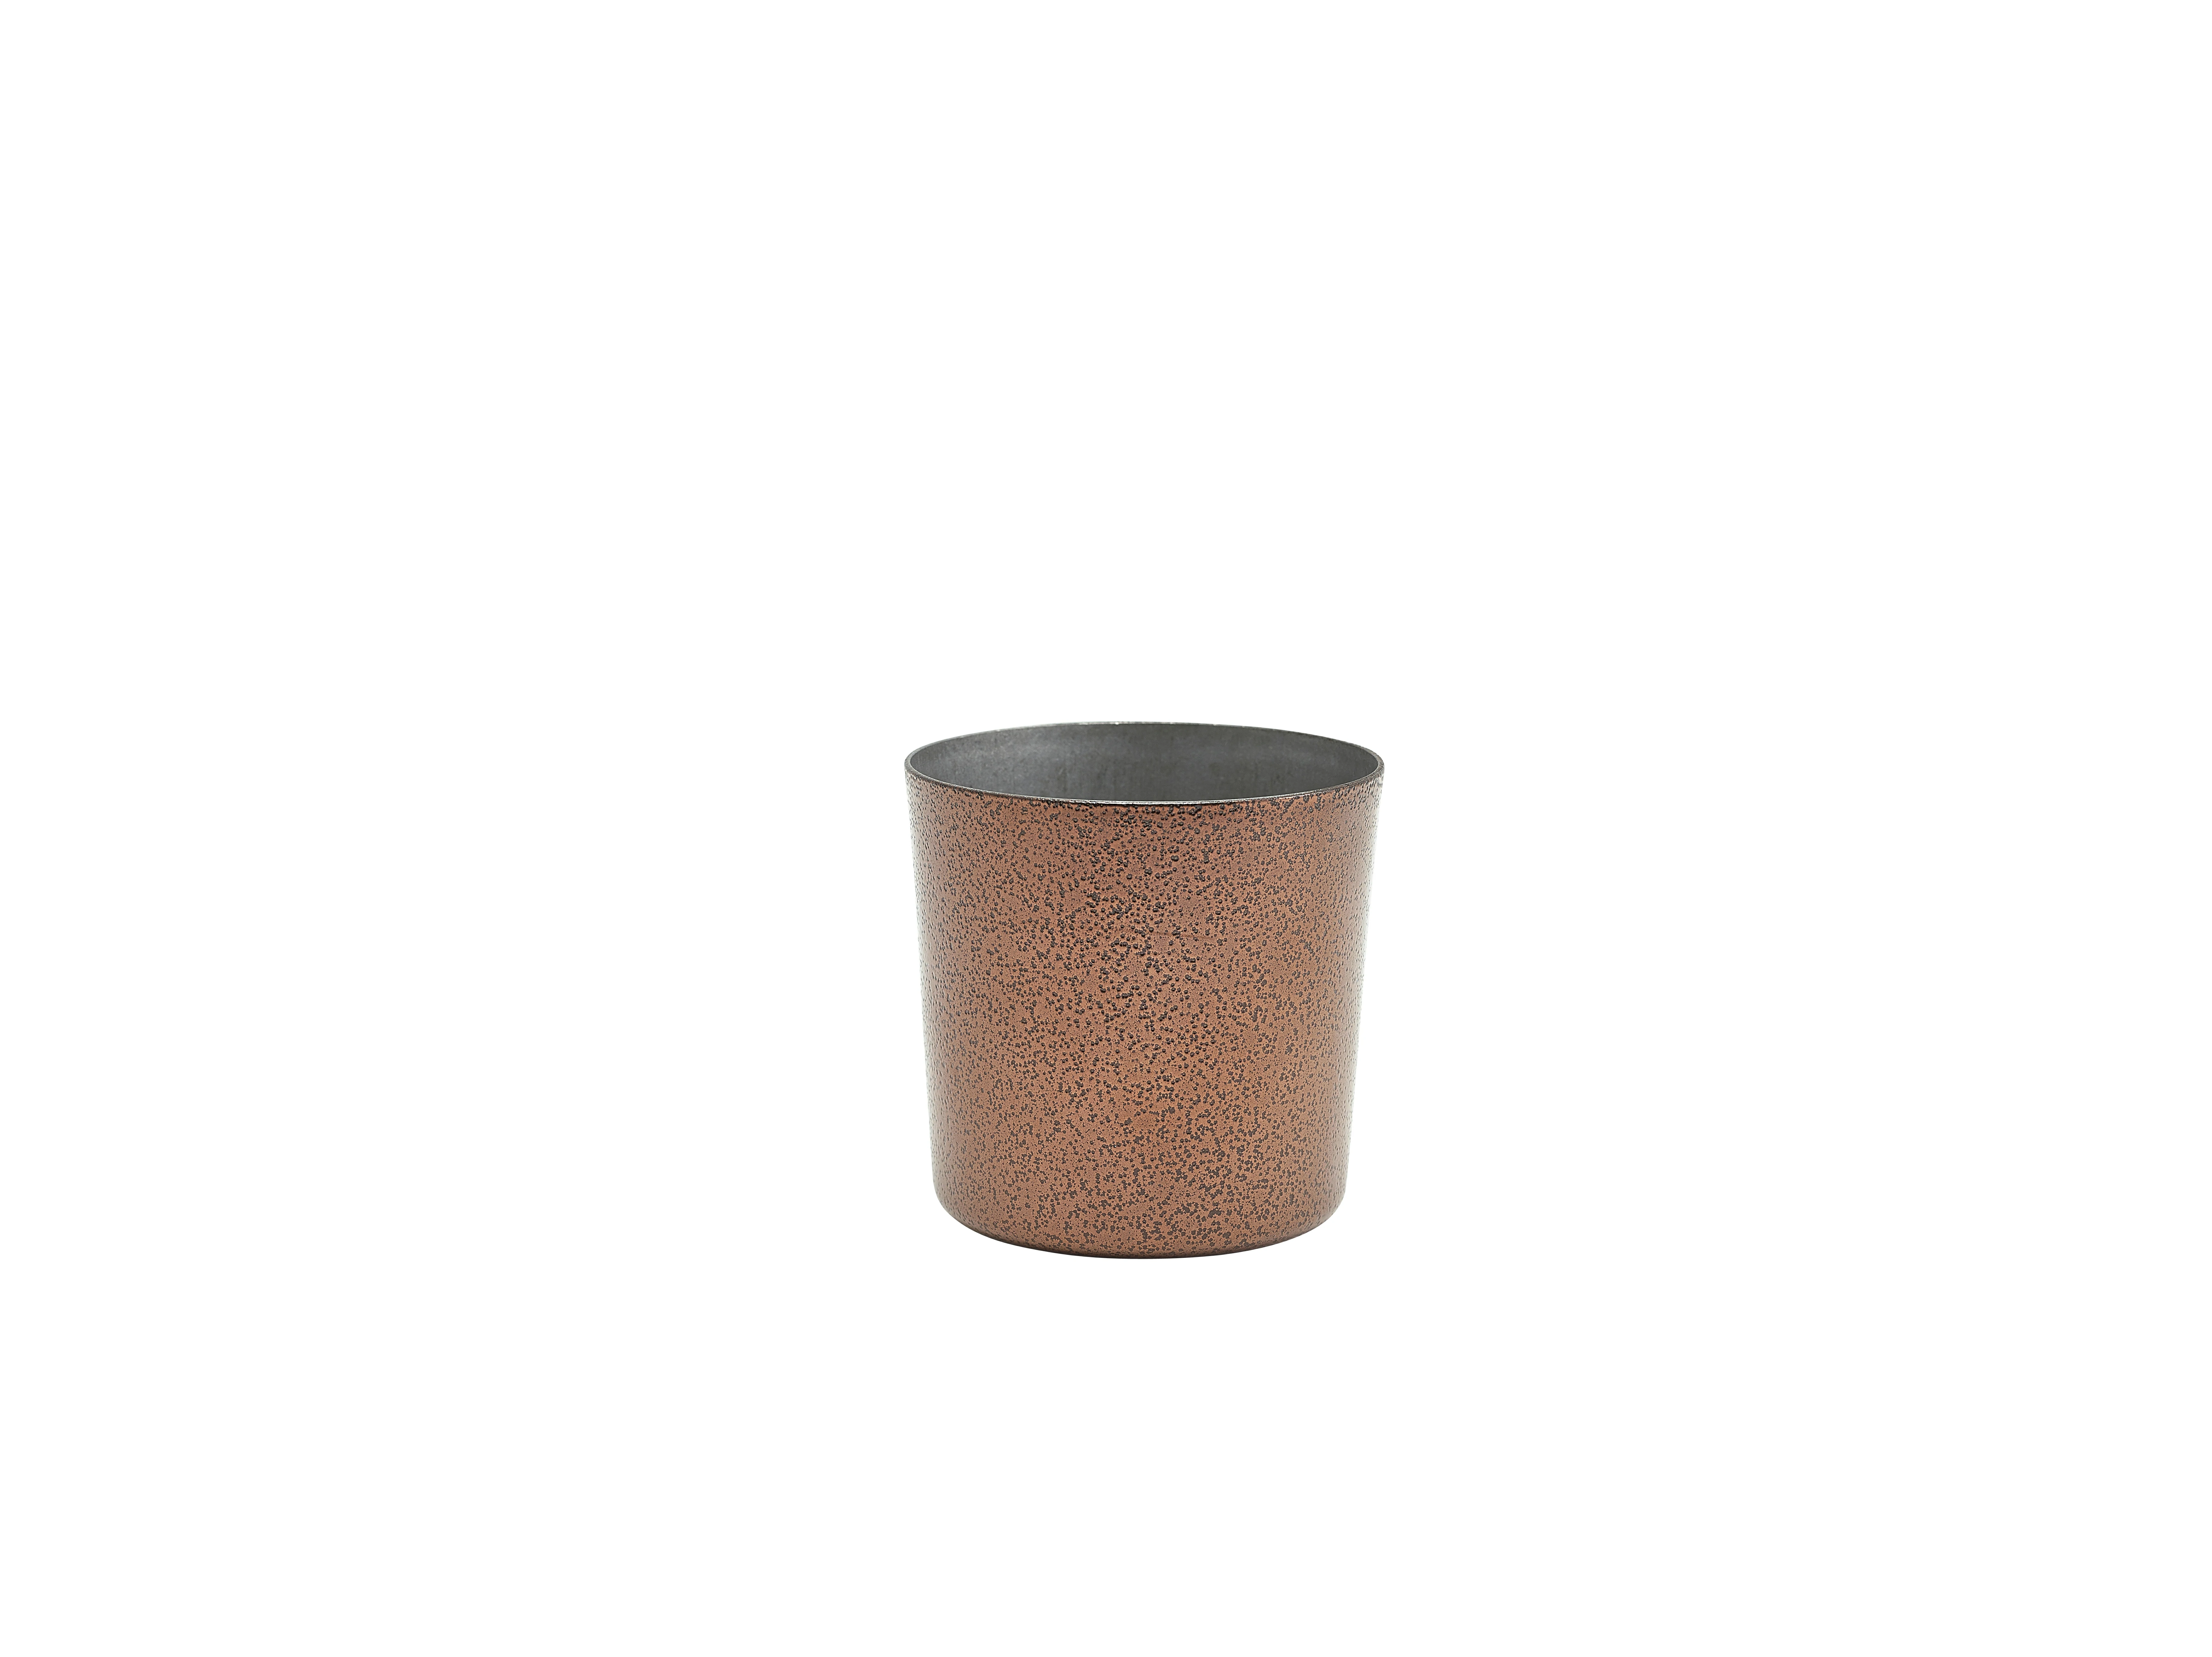 Stainless Steel Serving Cup 8.5 x 8.5cm Hammered Copper